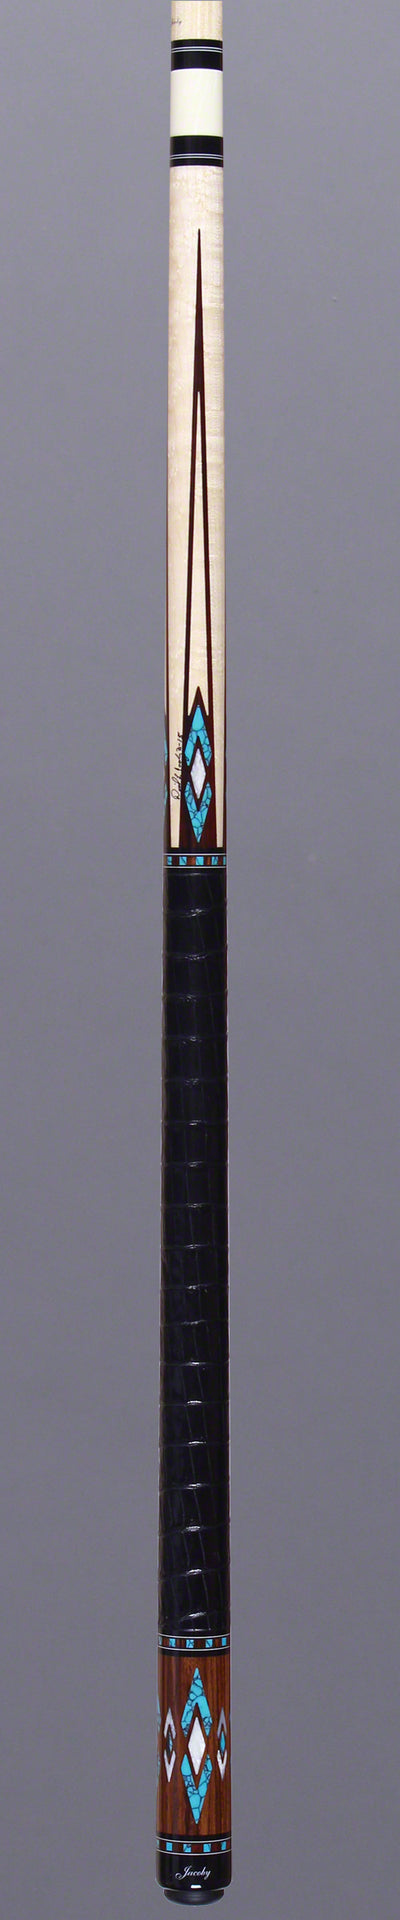 Jacoby HB4T Birdseye Maple Turquoise Cue